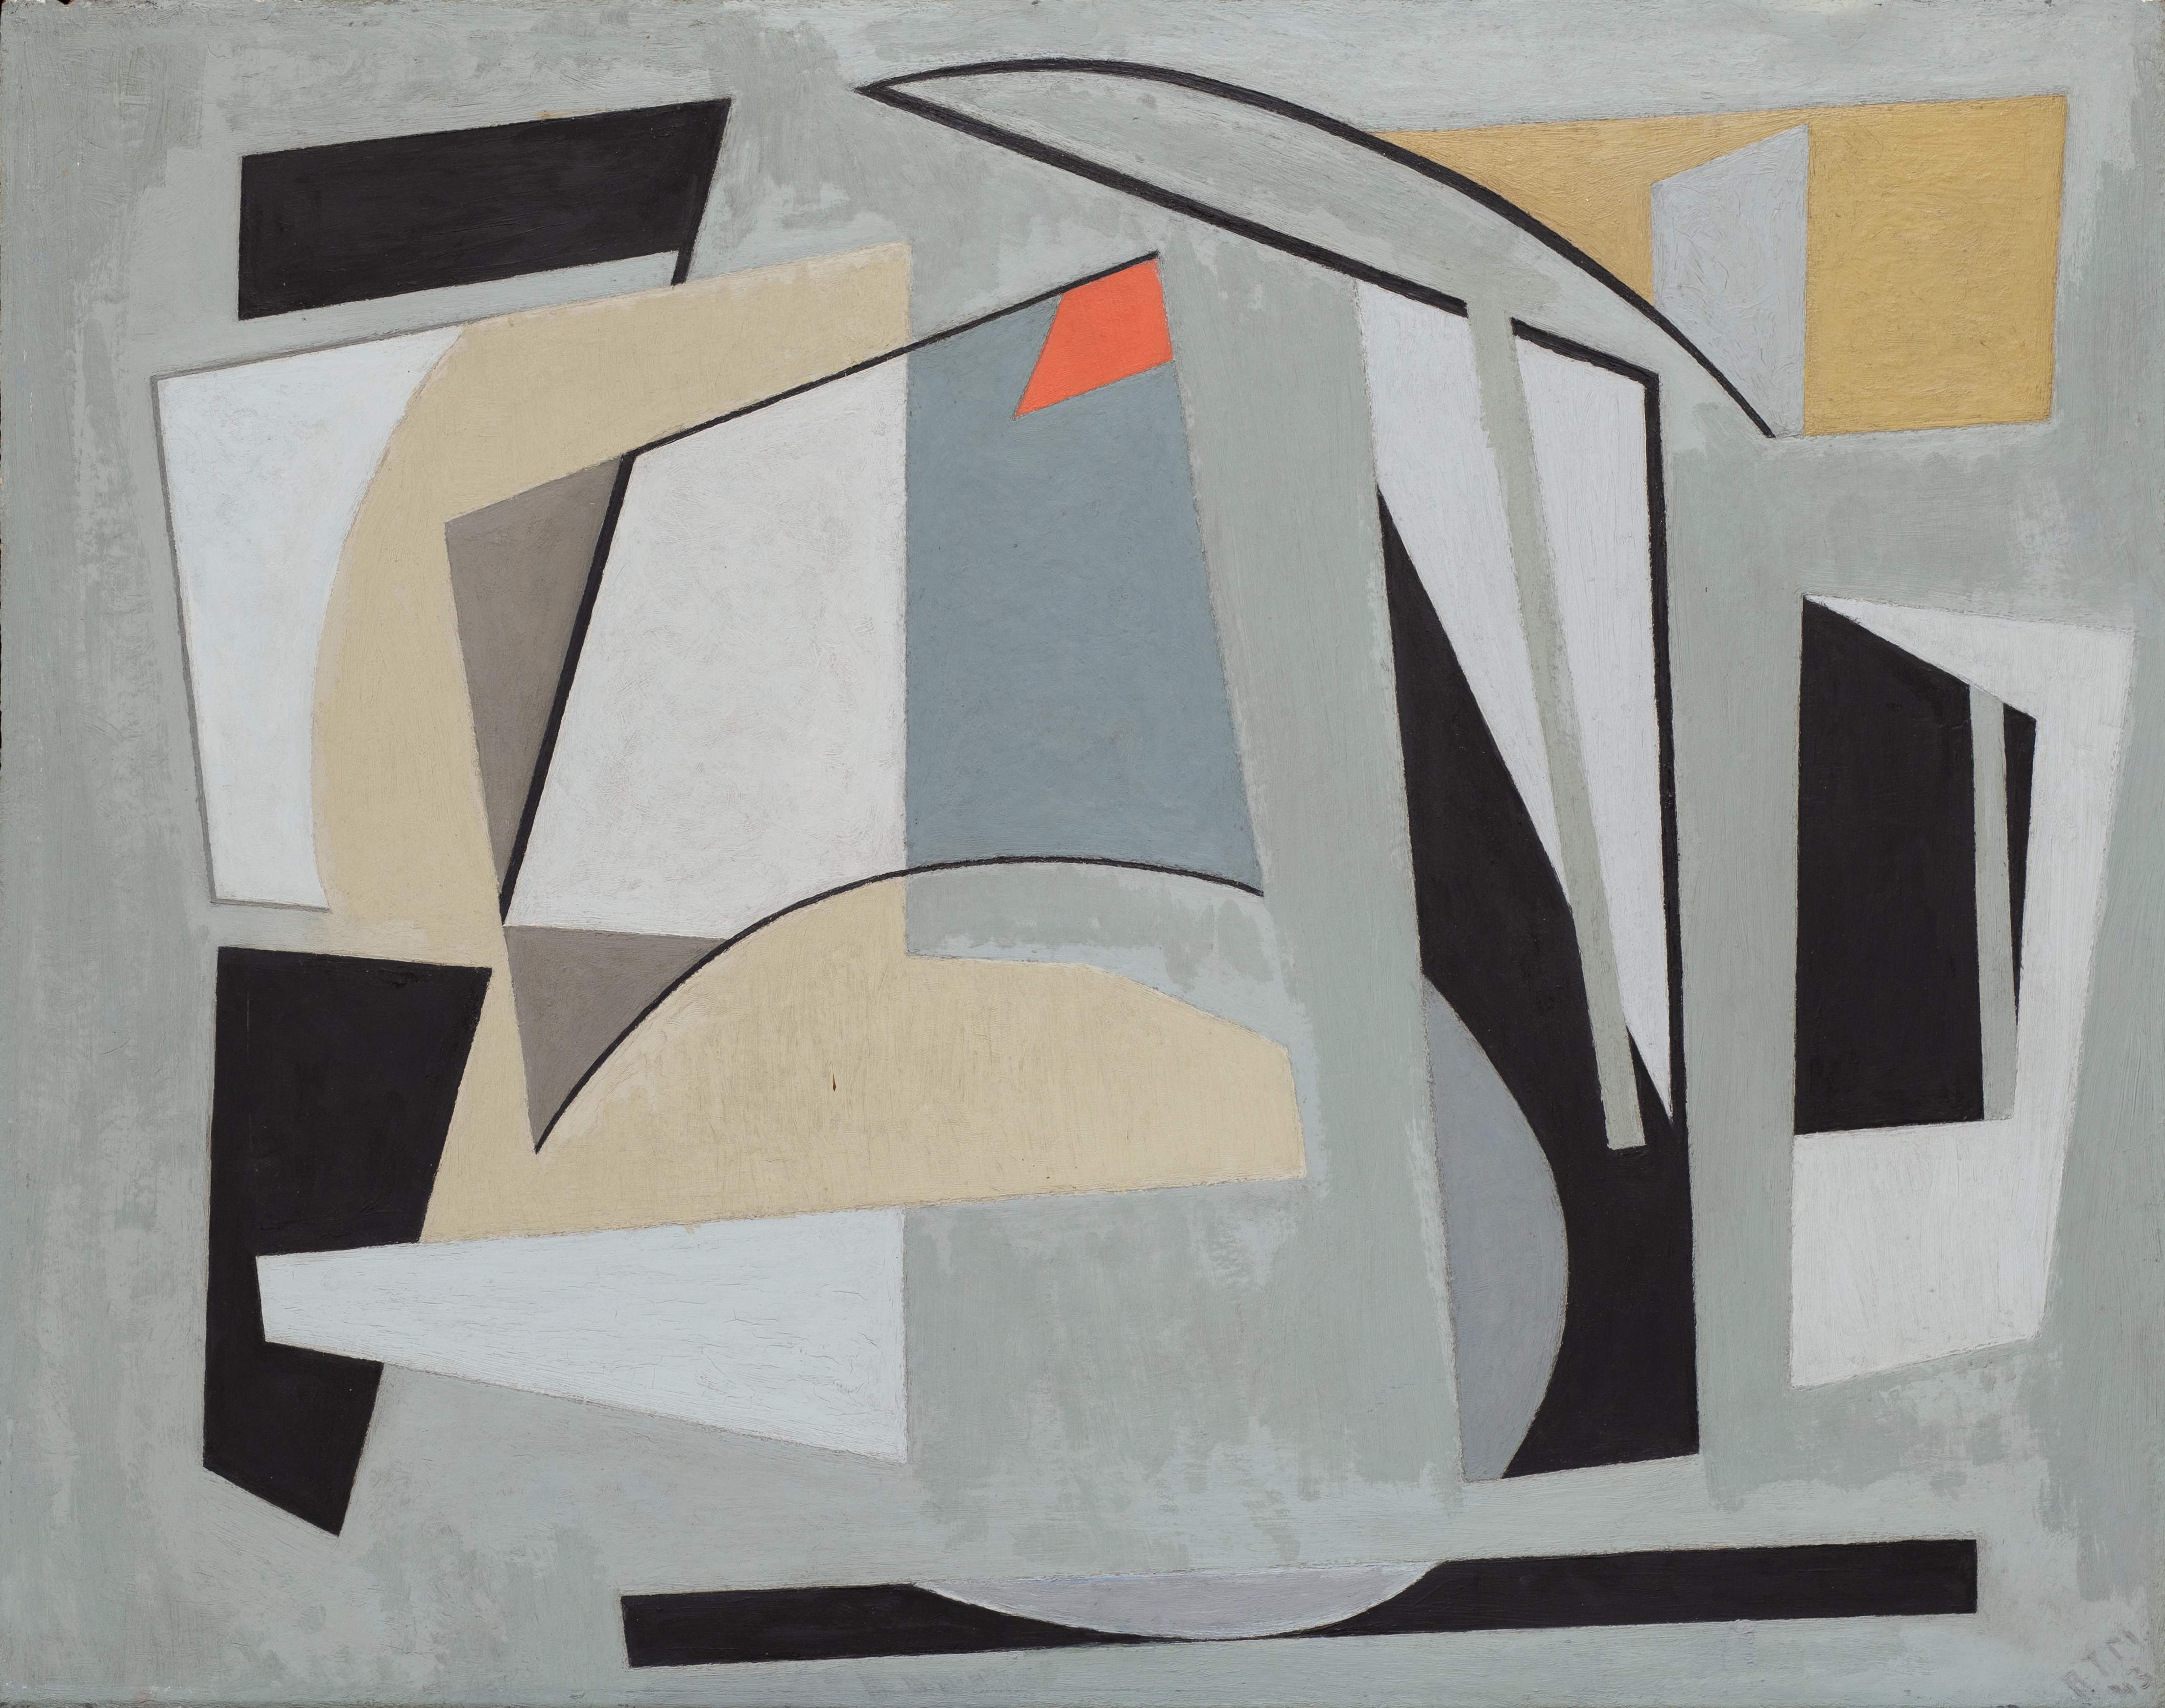 Abstract oil on masonite painting of curved and linear lines, creating both biomorphic and geometric forms. The dominant color is light grey, with white, black, dark grey, and yellow-beige forms.